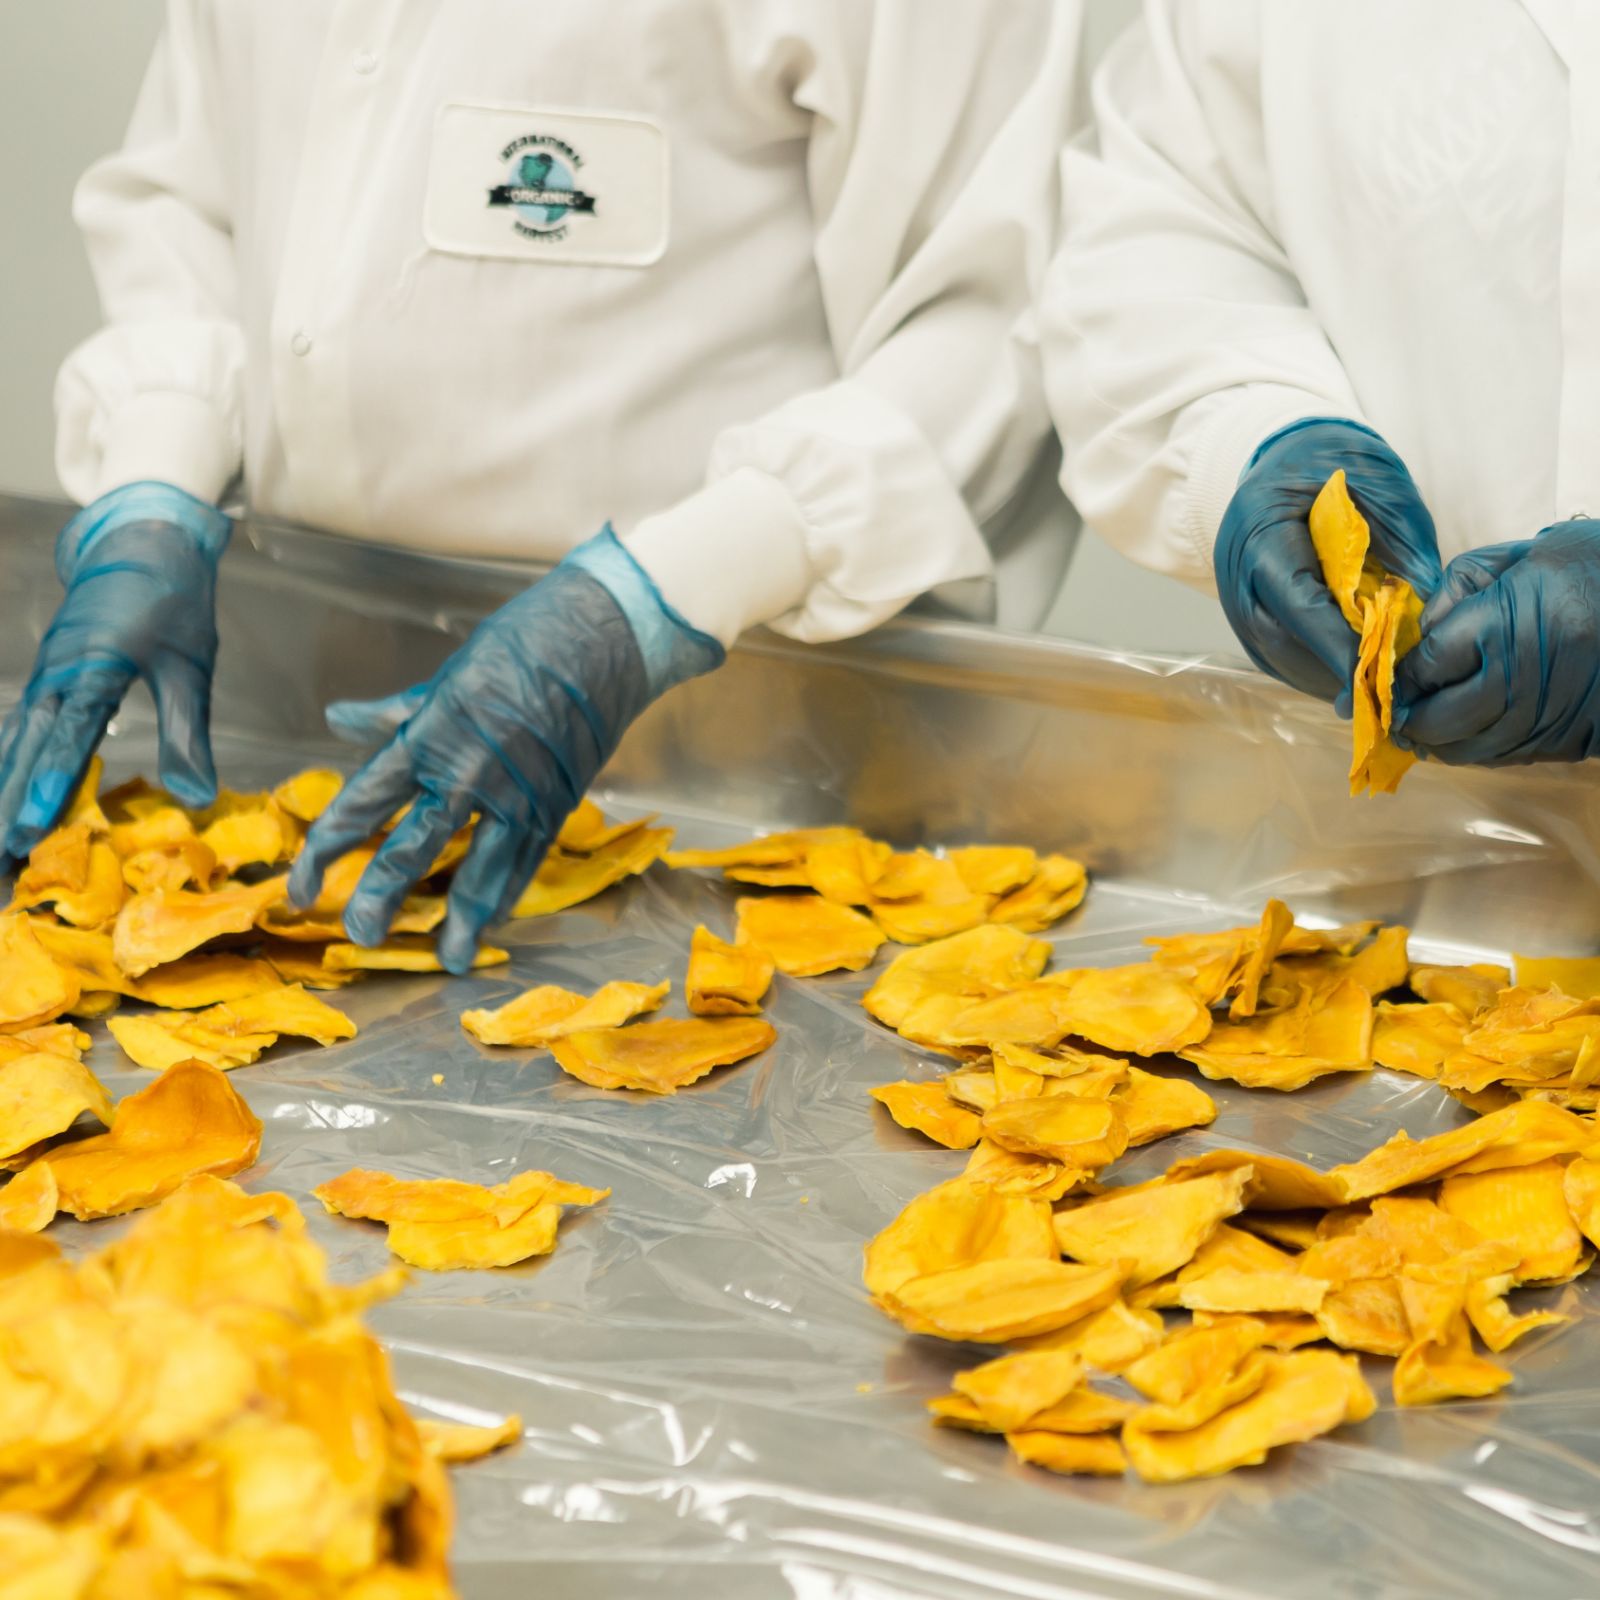 Worker sorting food at a plant